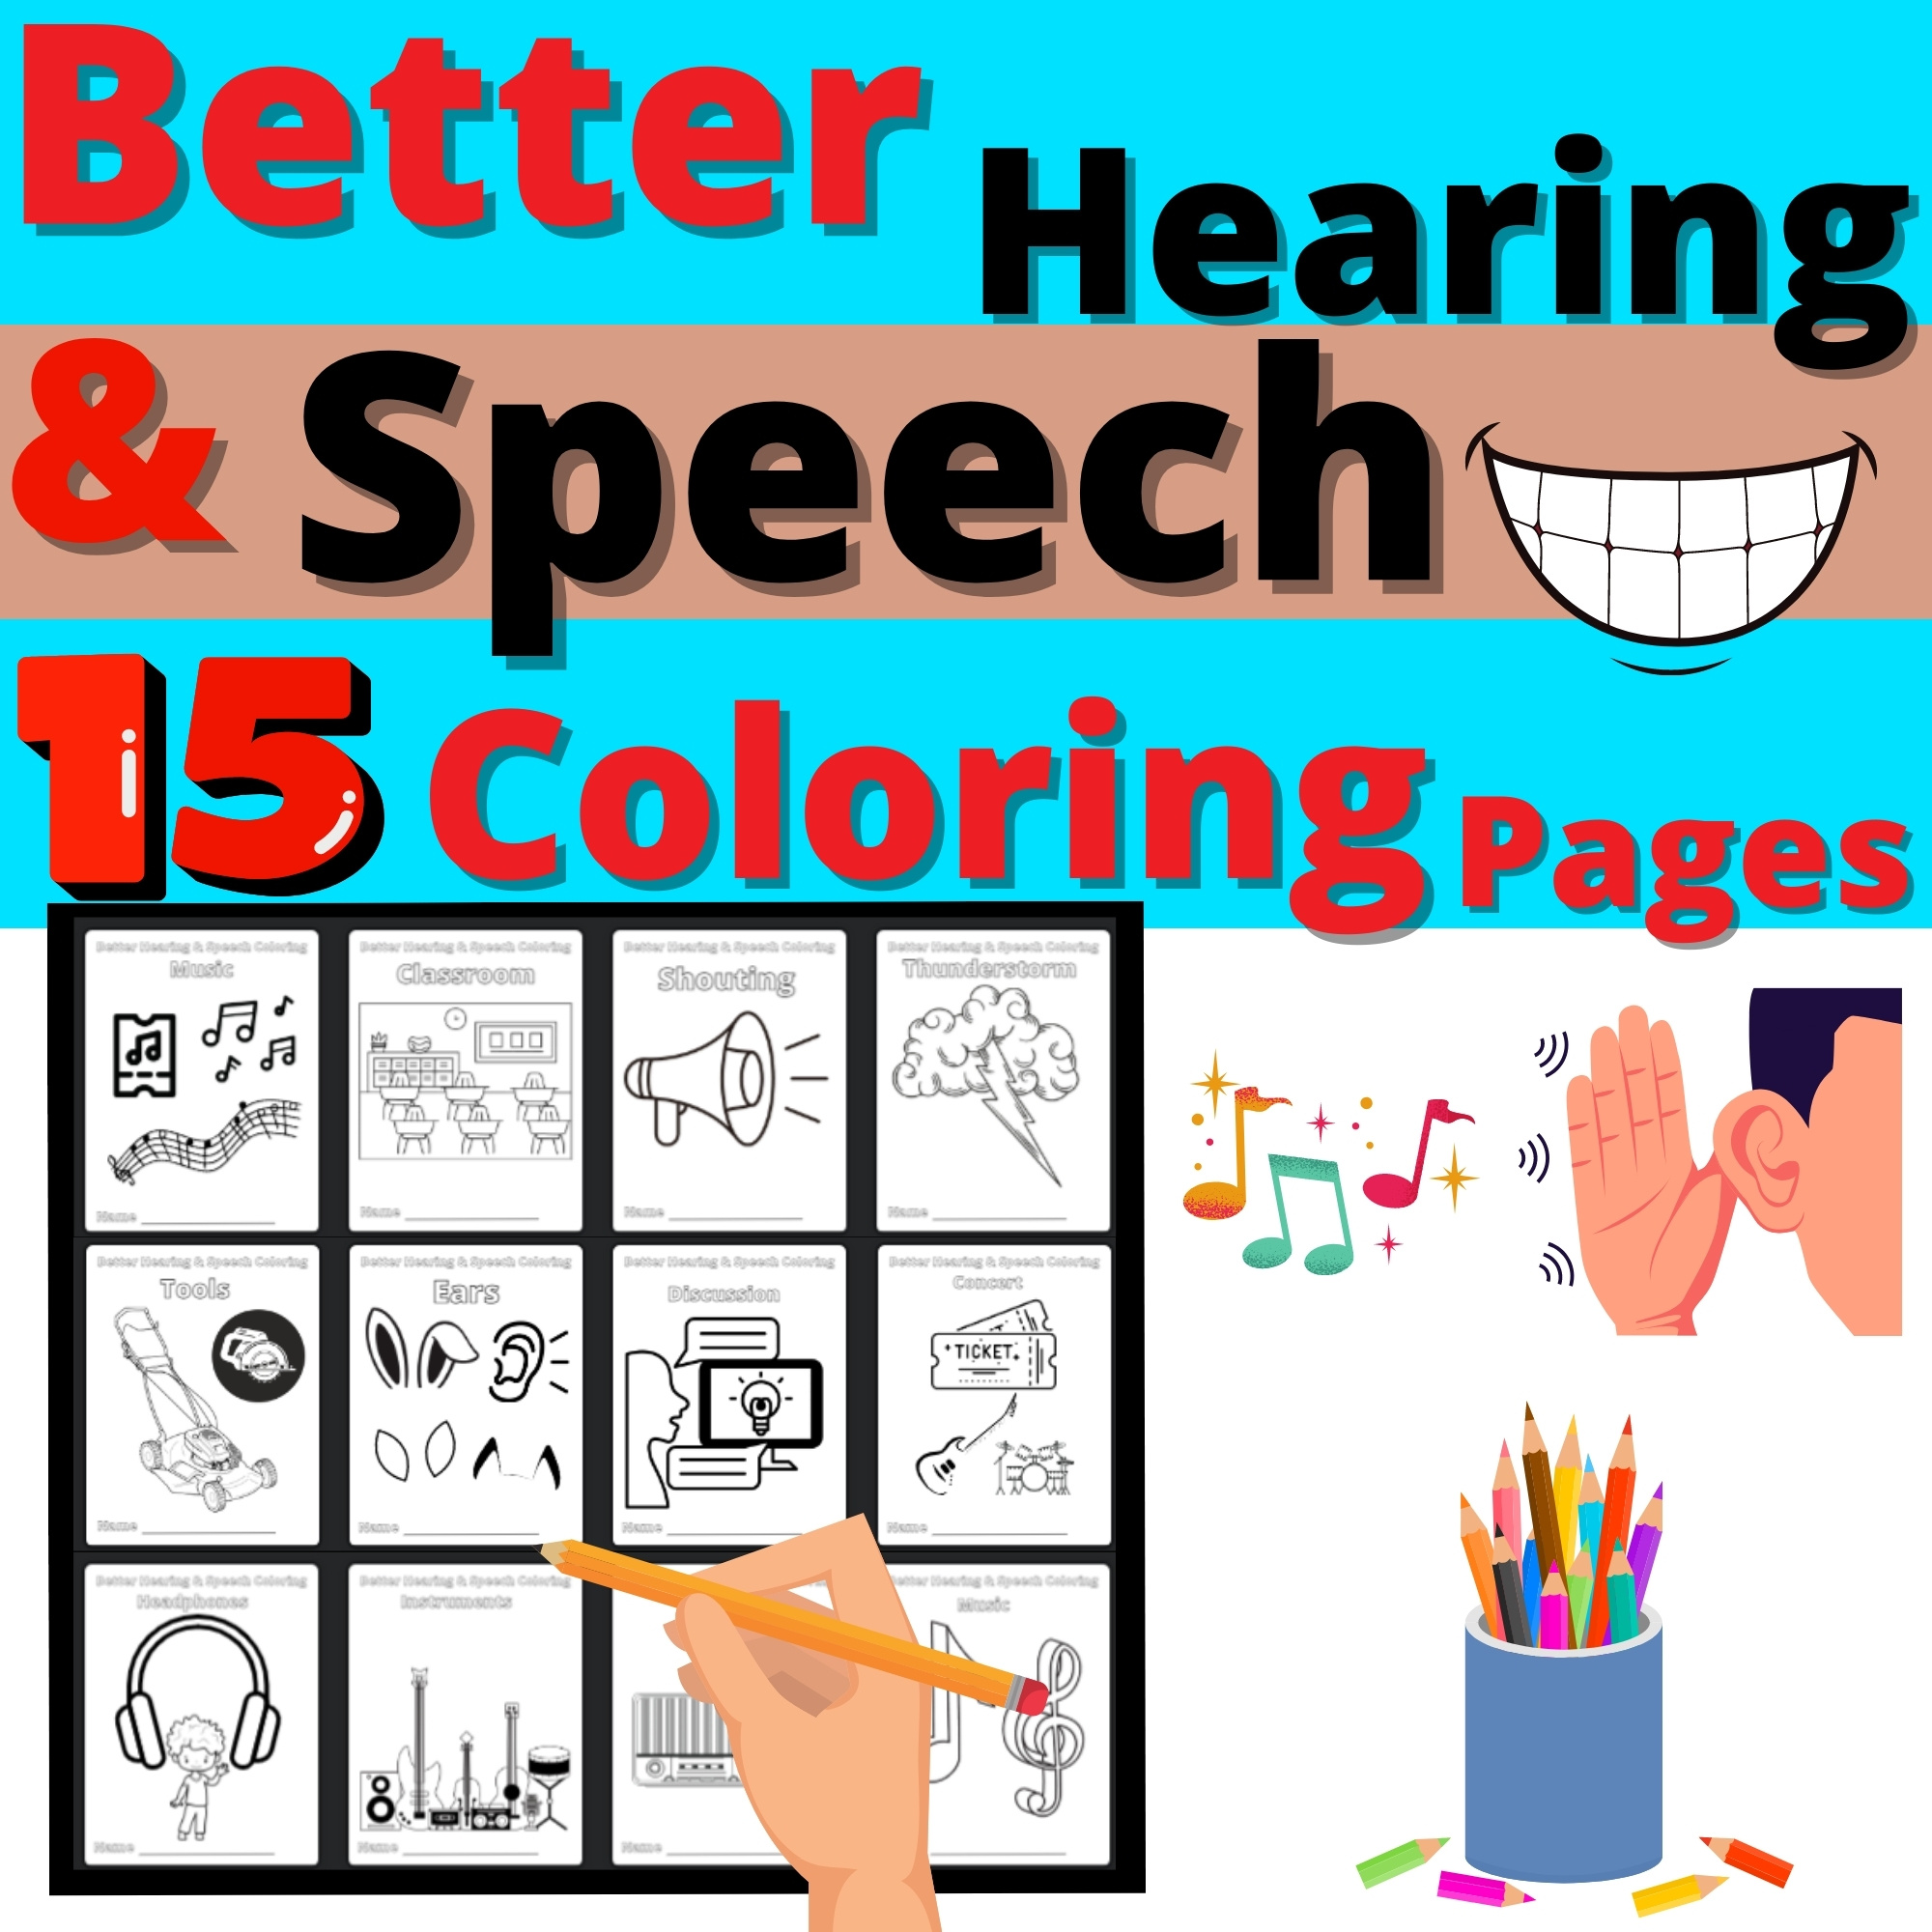 Better hearing and speech month craft art coloring pages resource activity made by teachers